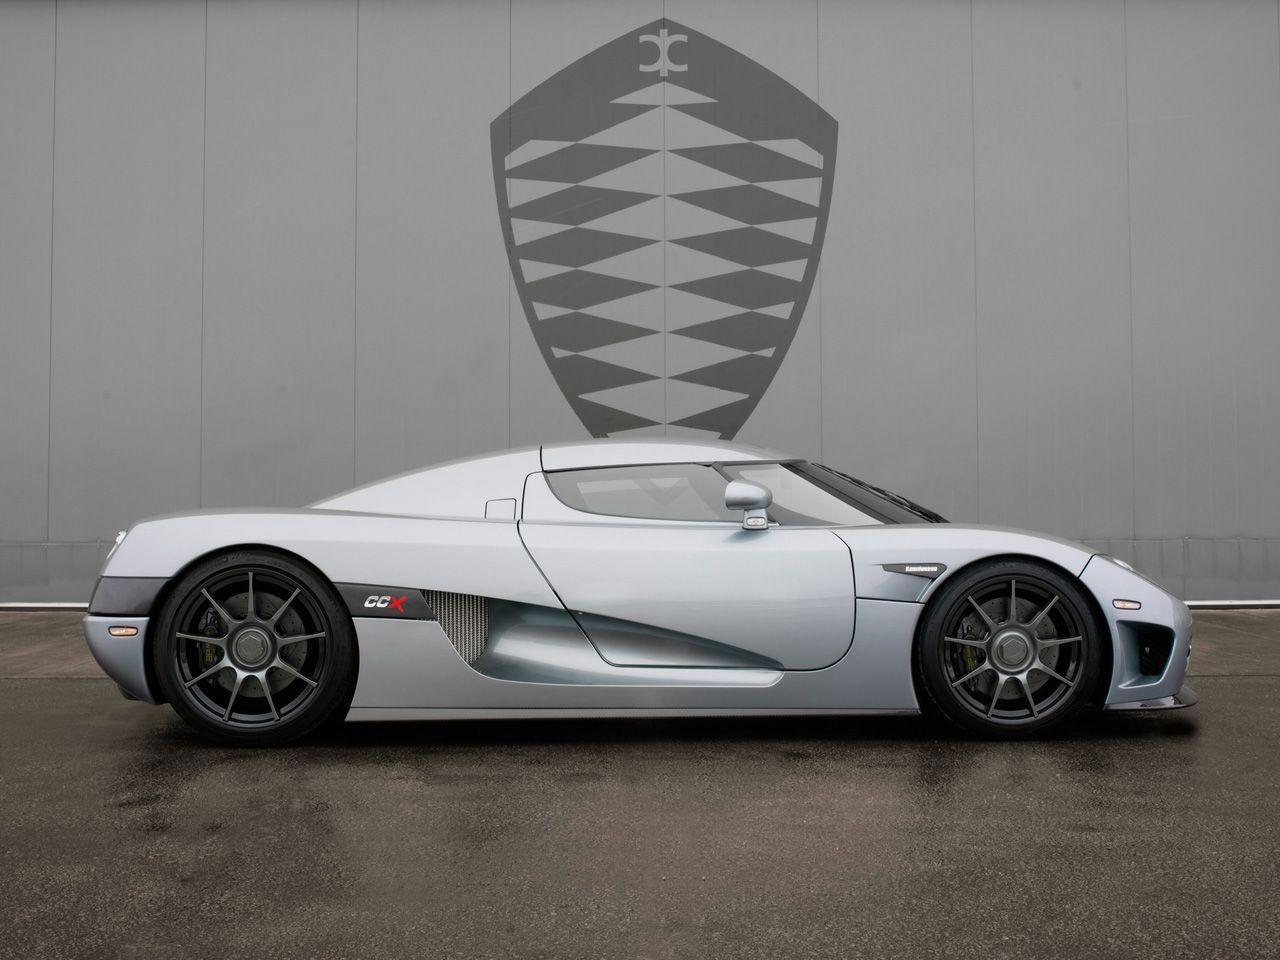 The Koenigsegg CCX:image for wallpaper and background